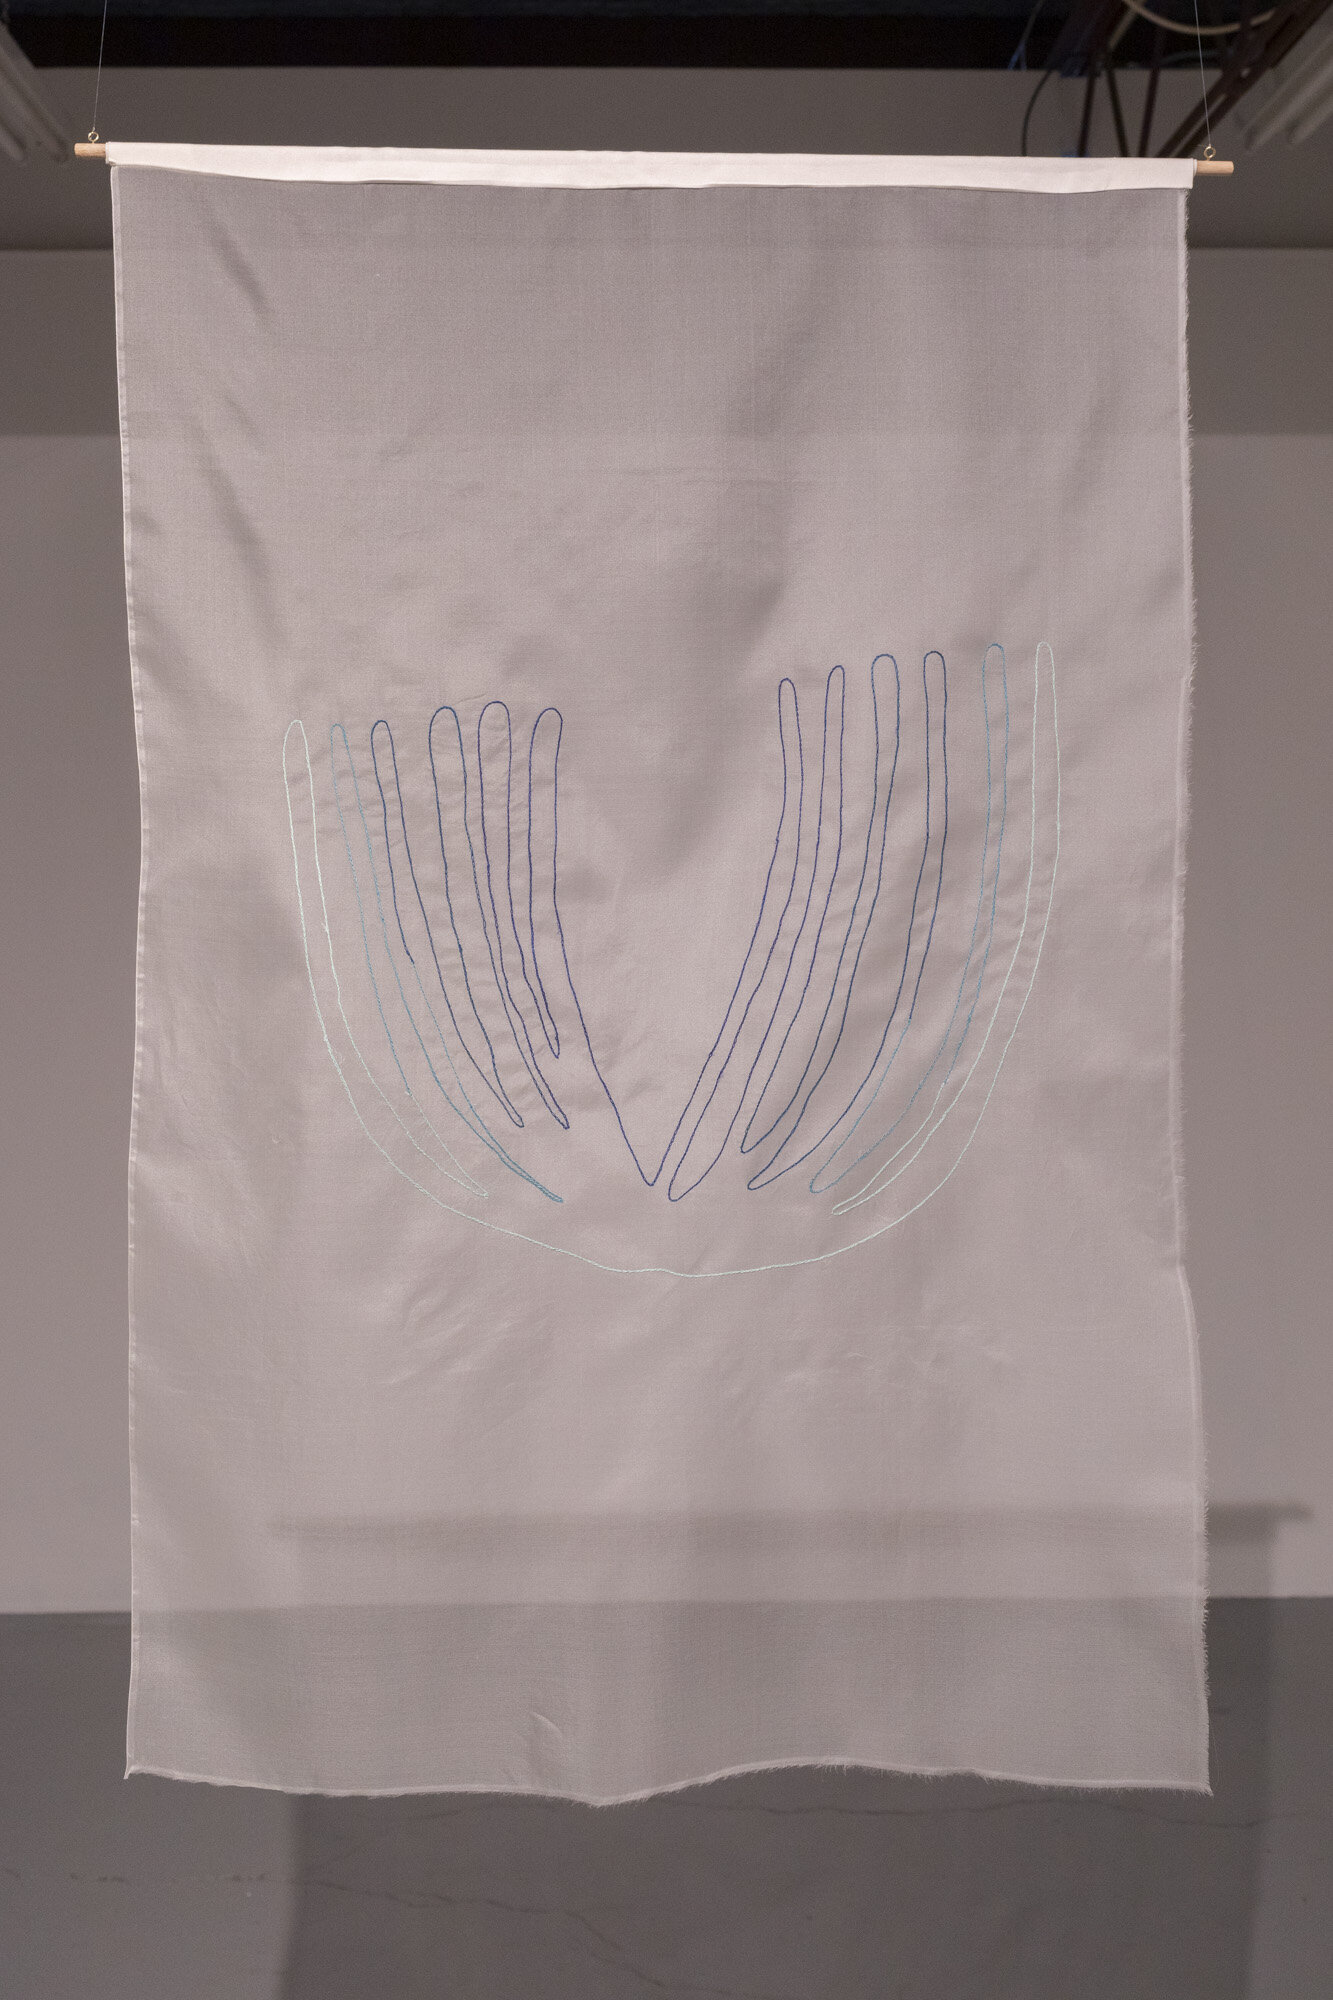   you reverberate  cotton hand embroidery on silk organza, 70cm x 100cm June 2021 AIRspace Projects  Image:  Joy M Lai   